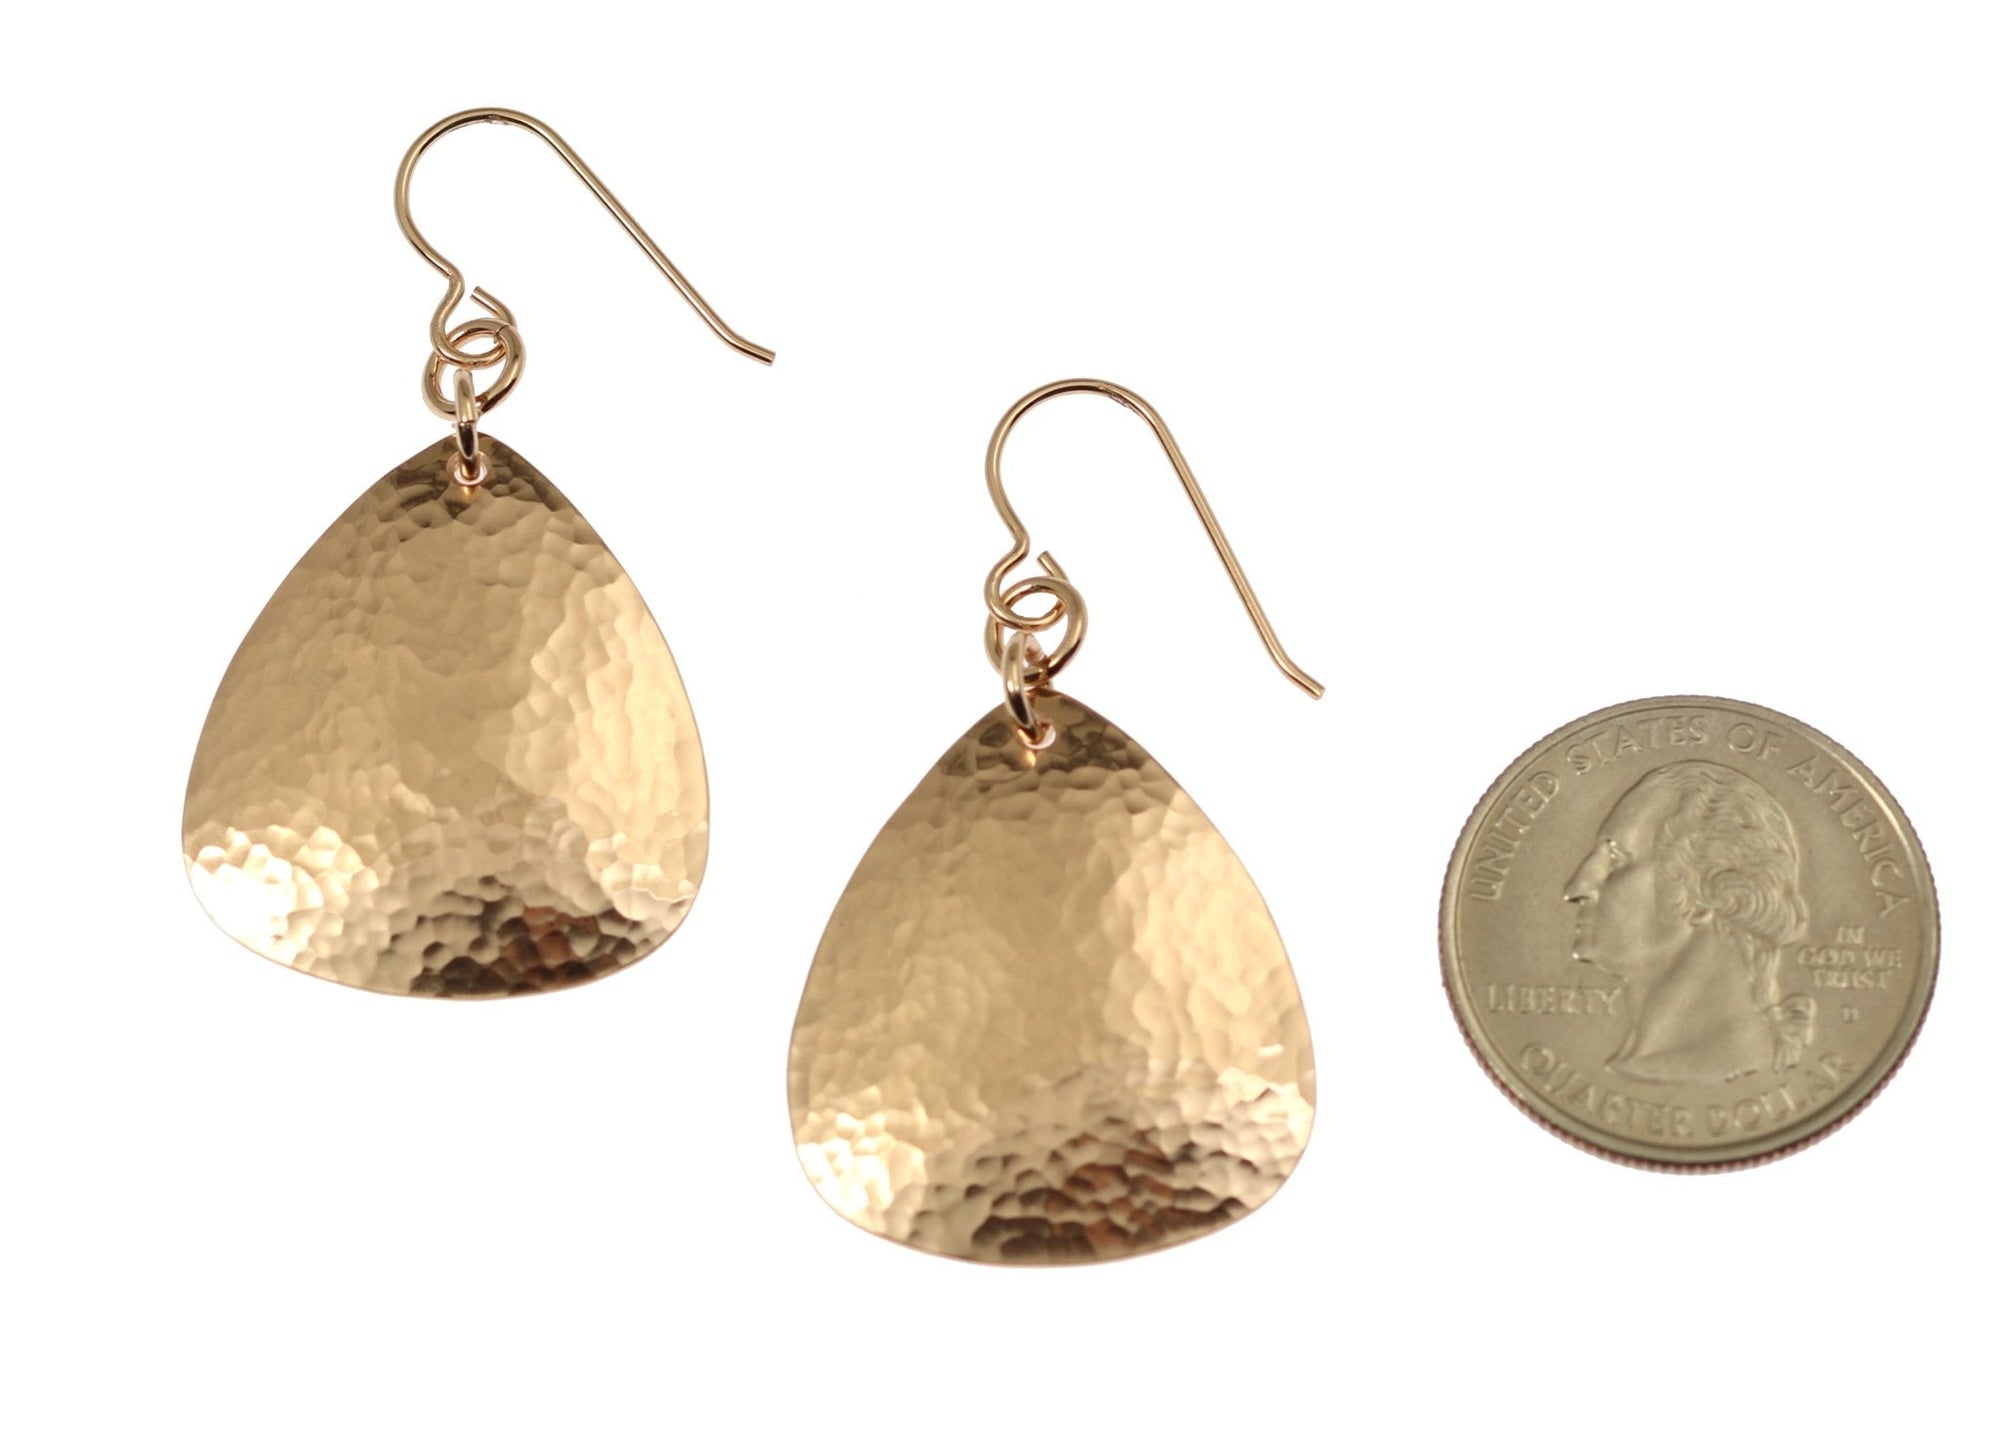 Size of Hammered Bronze Triangular Earrings